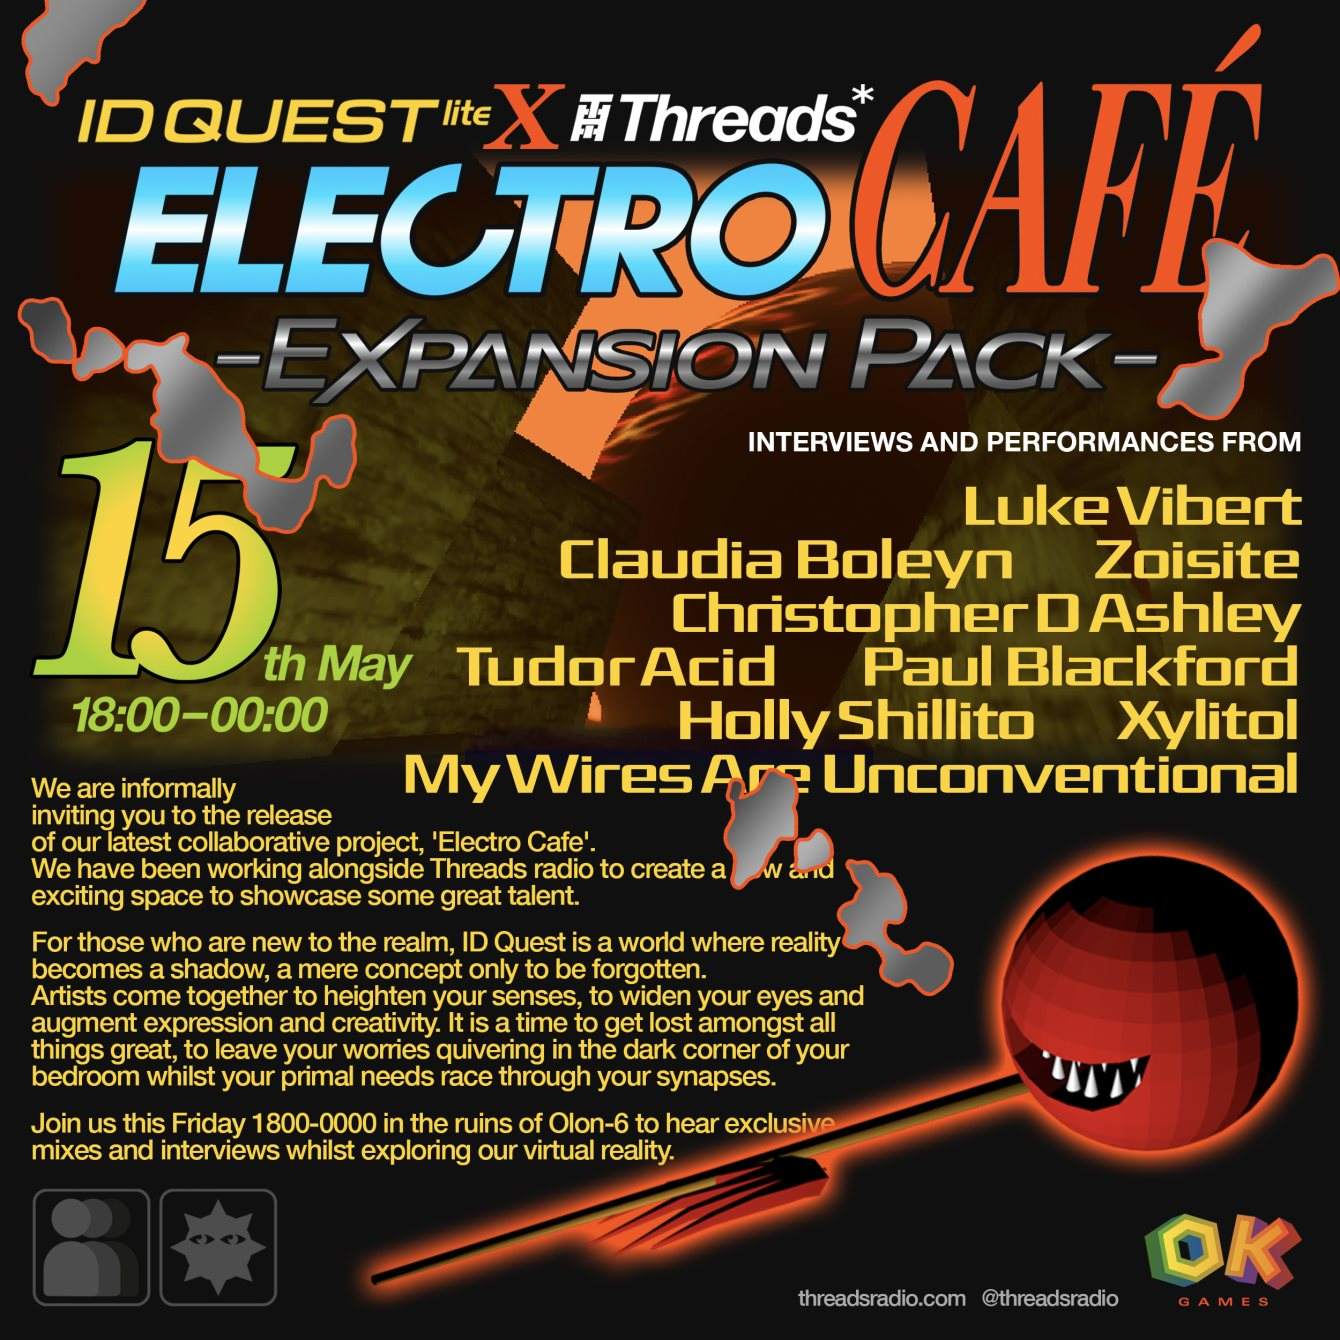 Threads x ID Quest Virtual Rave: Electro Cafe Takeover - フライヤー裏